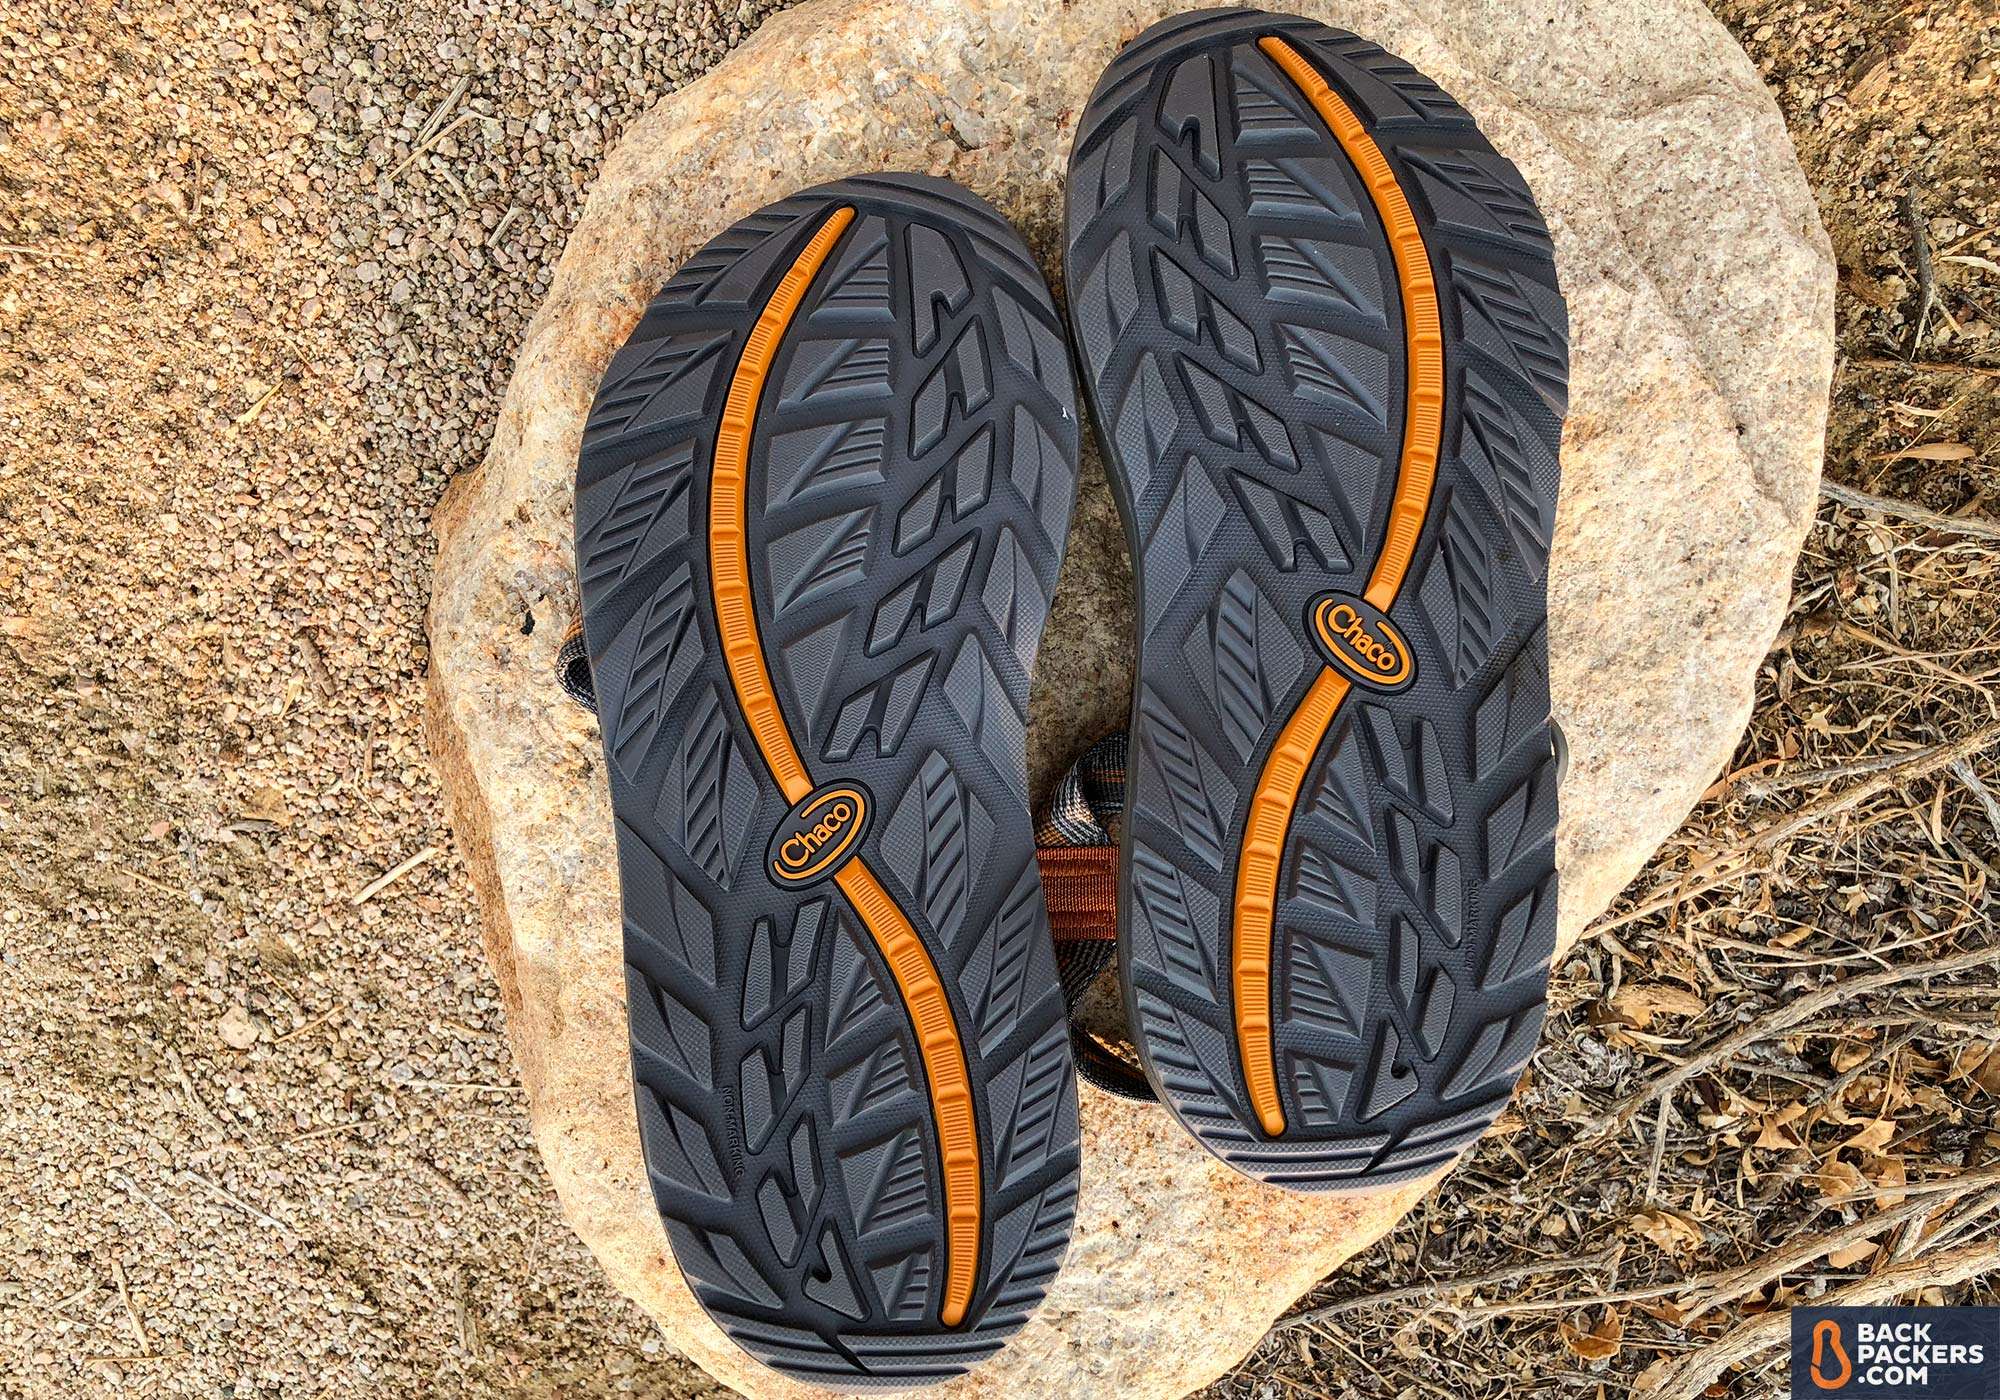 different chaco soles